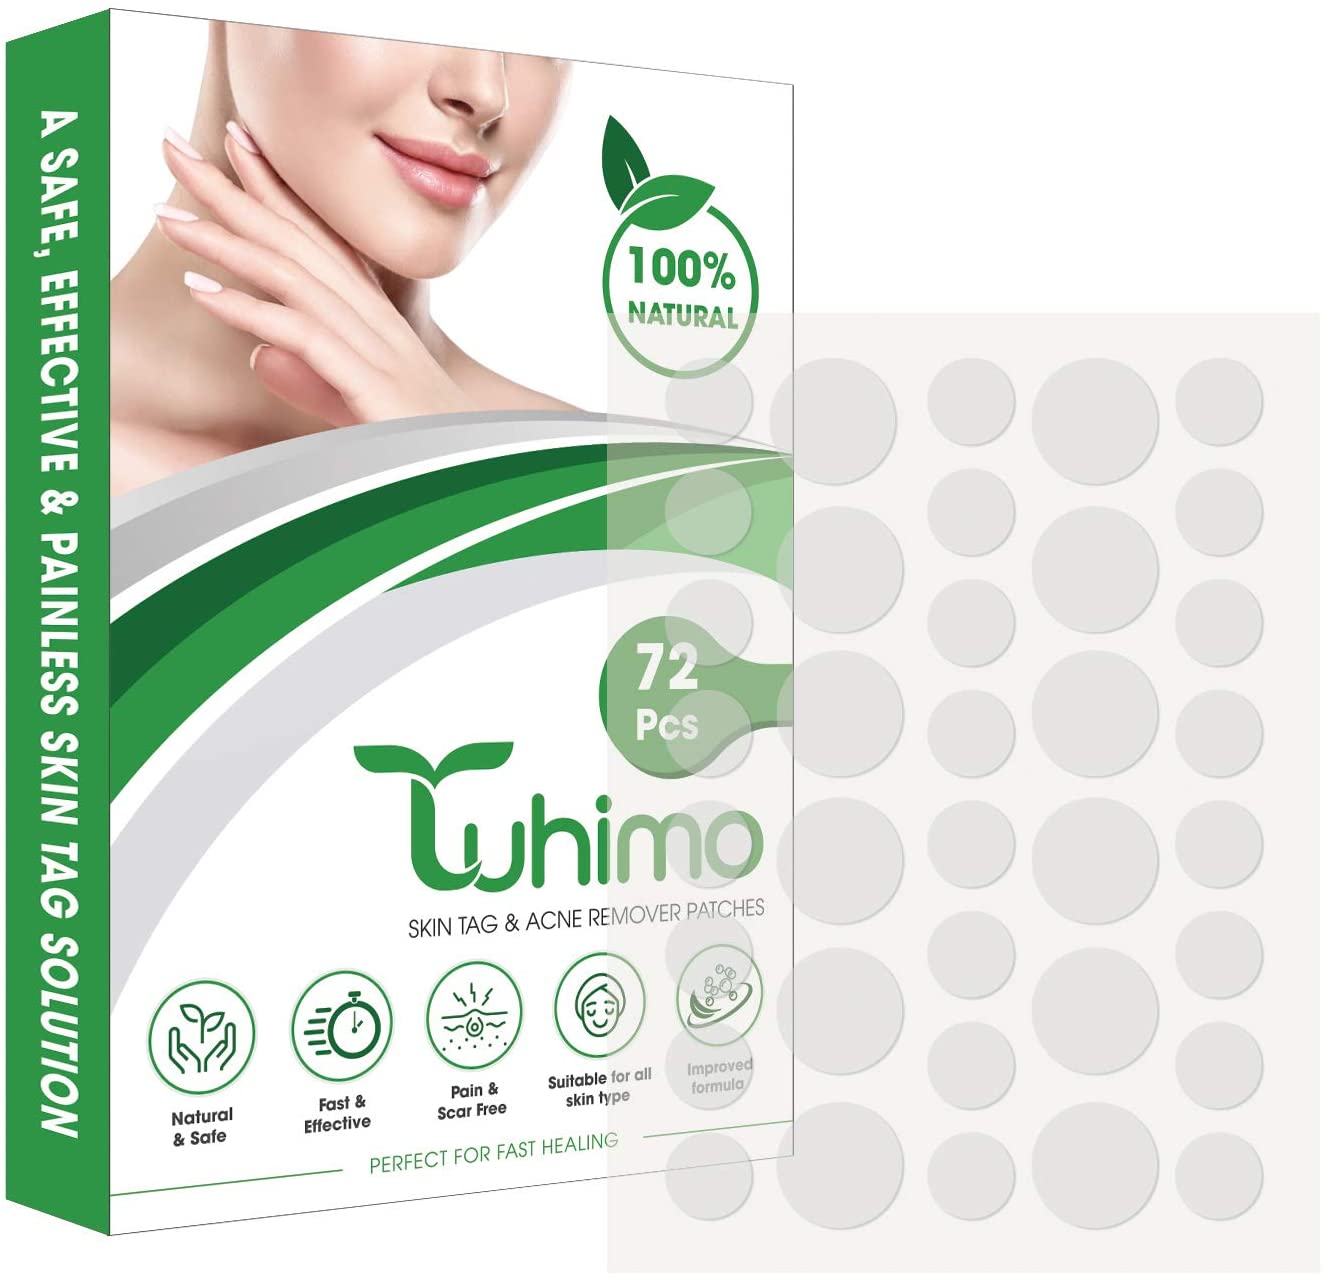 Tuhimo skin tag removal patches